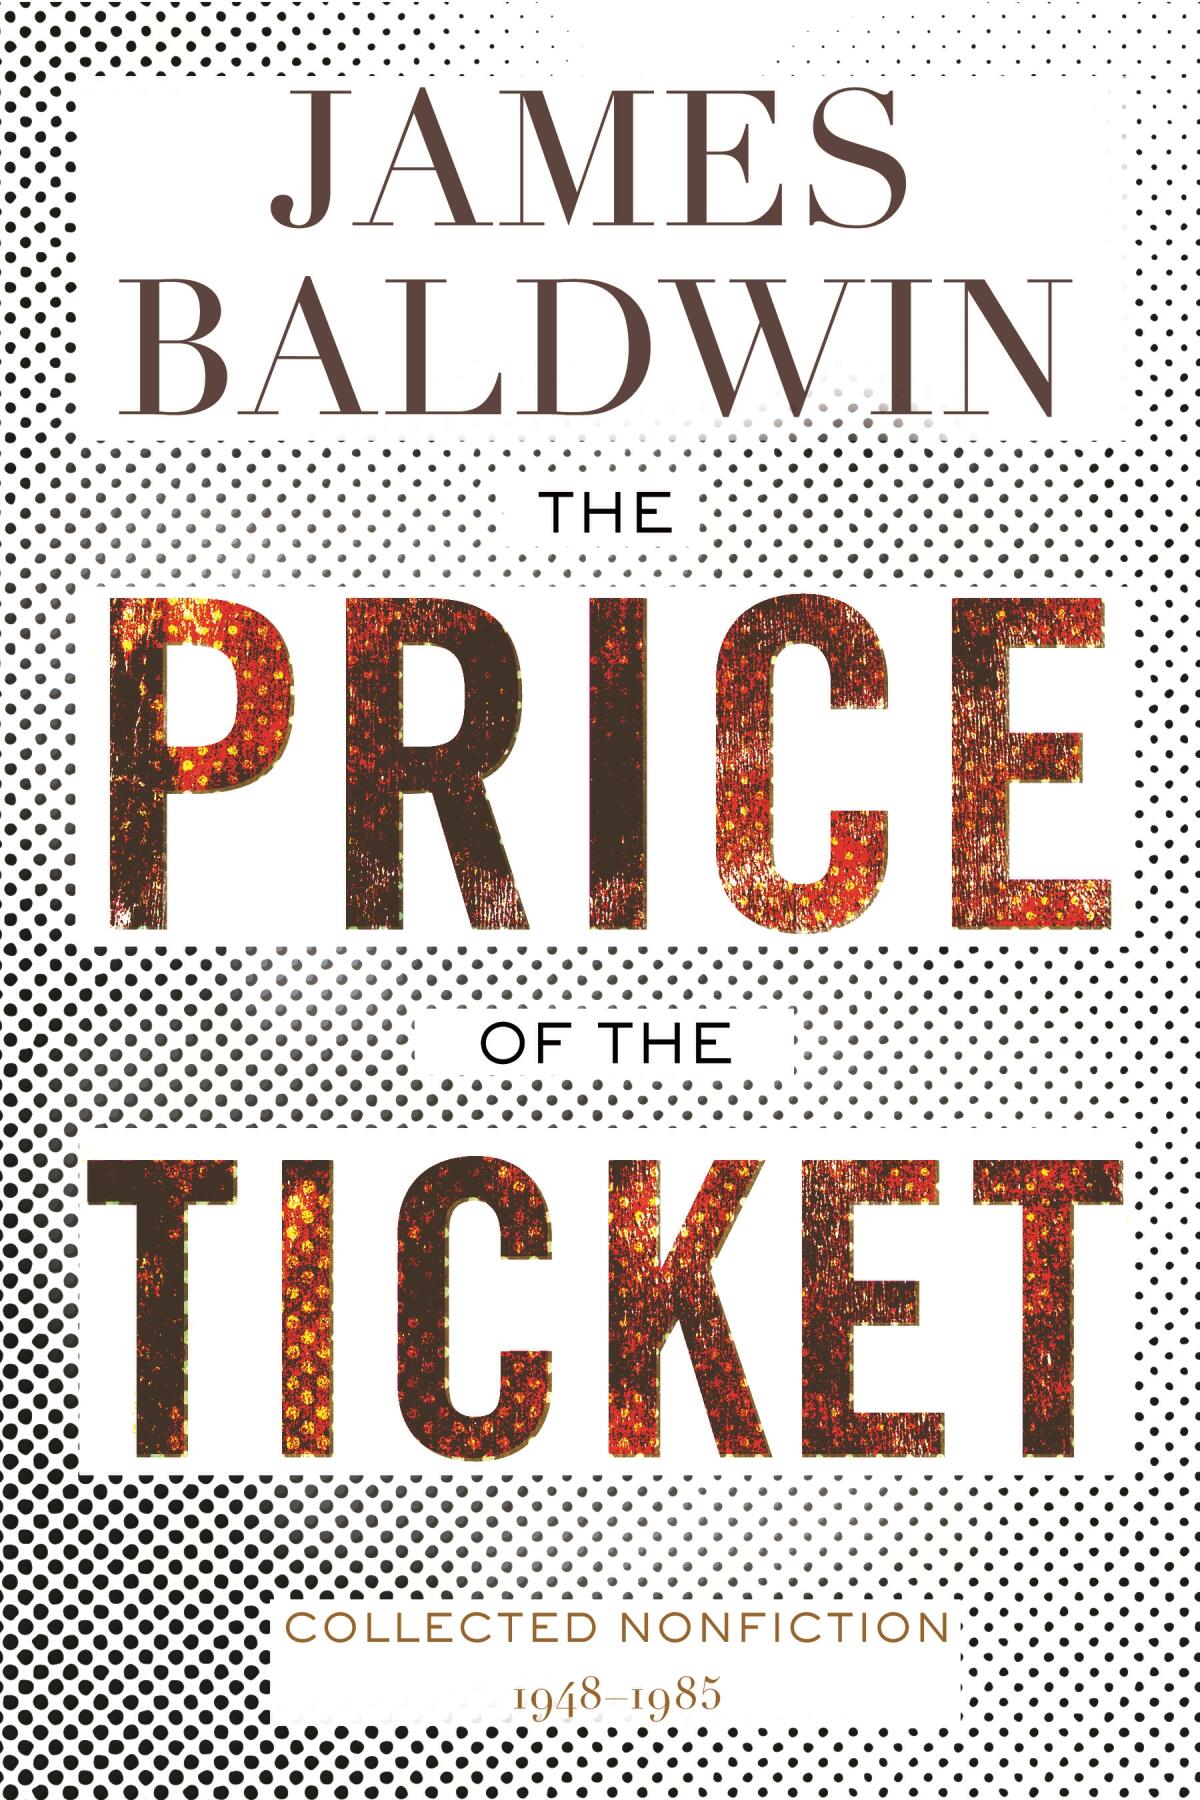 "The Price of a Ticket: Collected Nonfiction 1948-1985," by James Baldwin